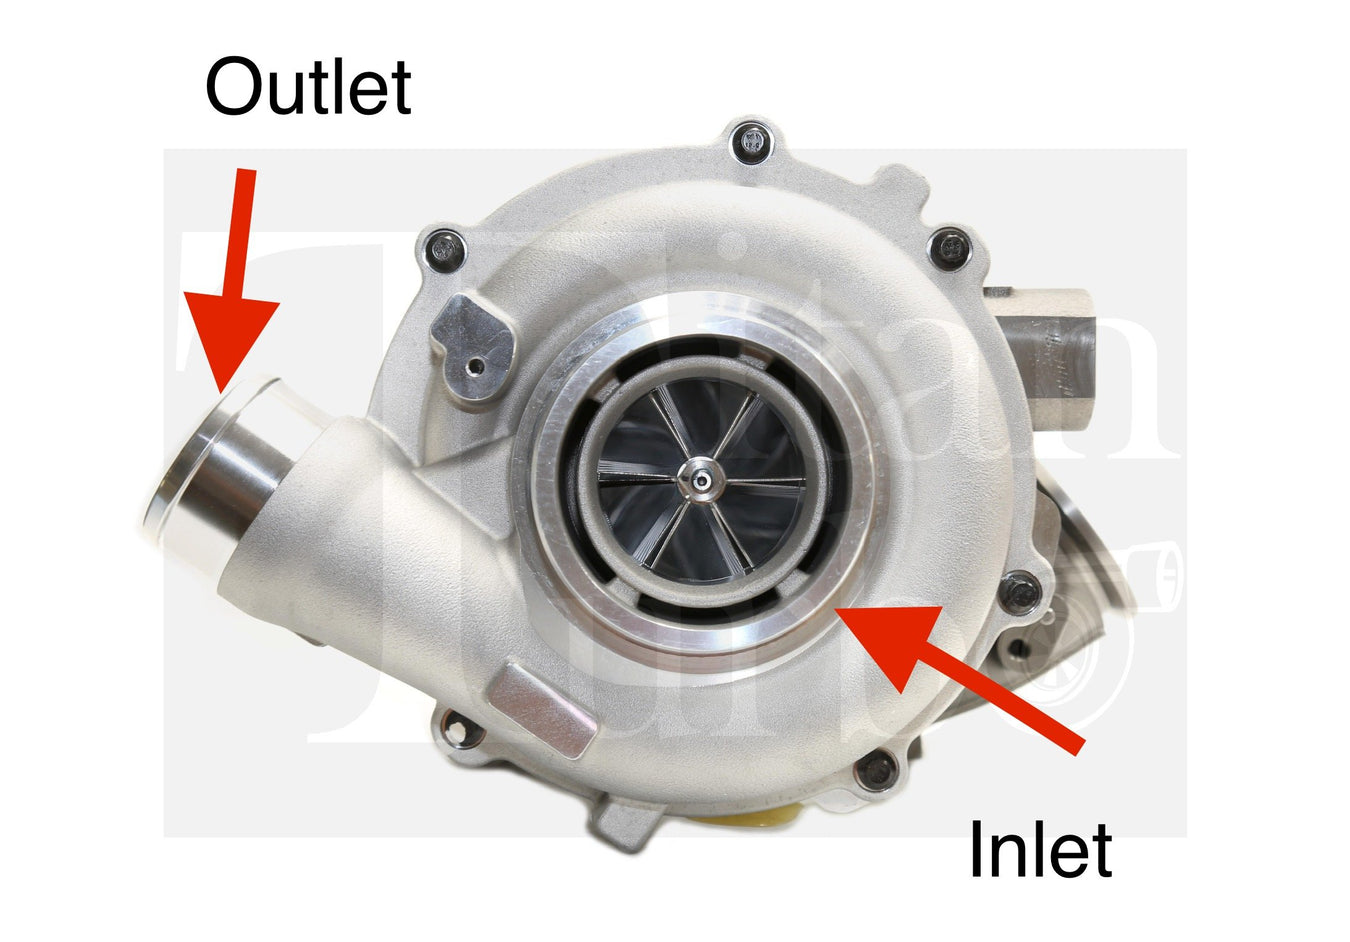 6.0 Modified Turbocharger